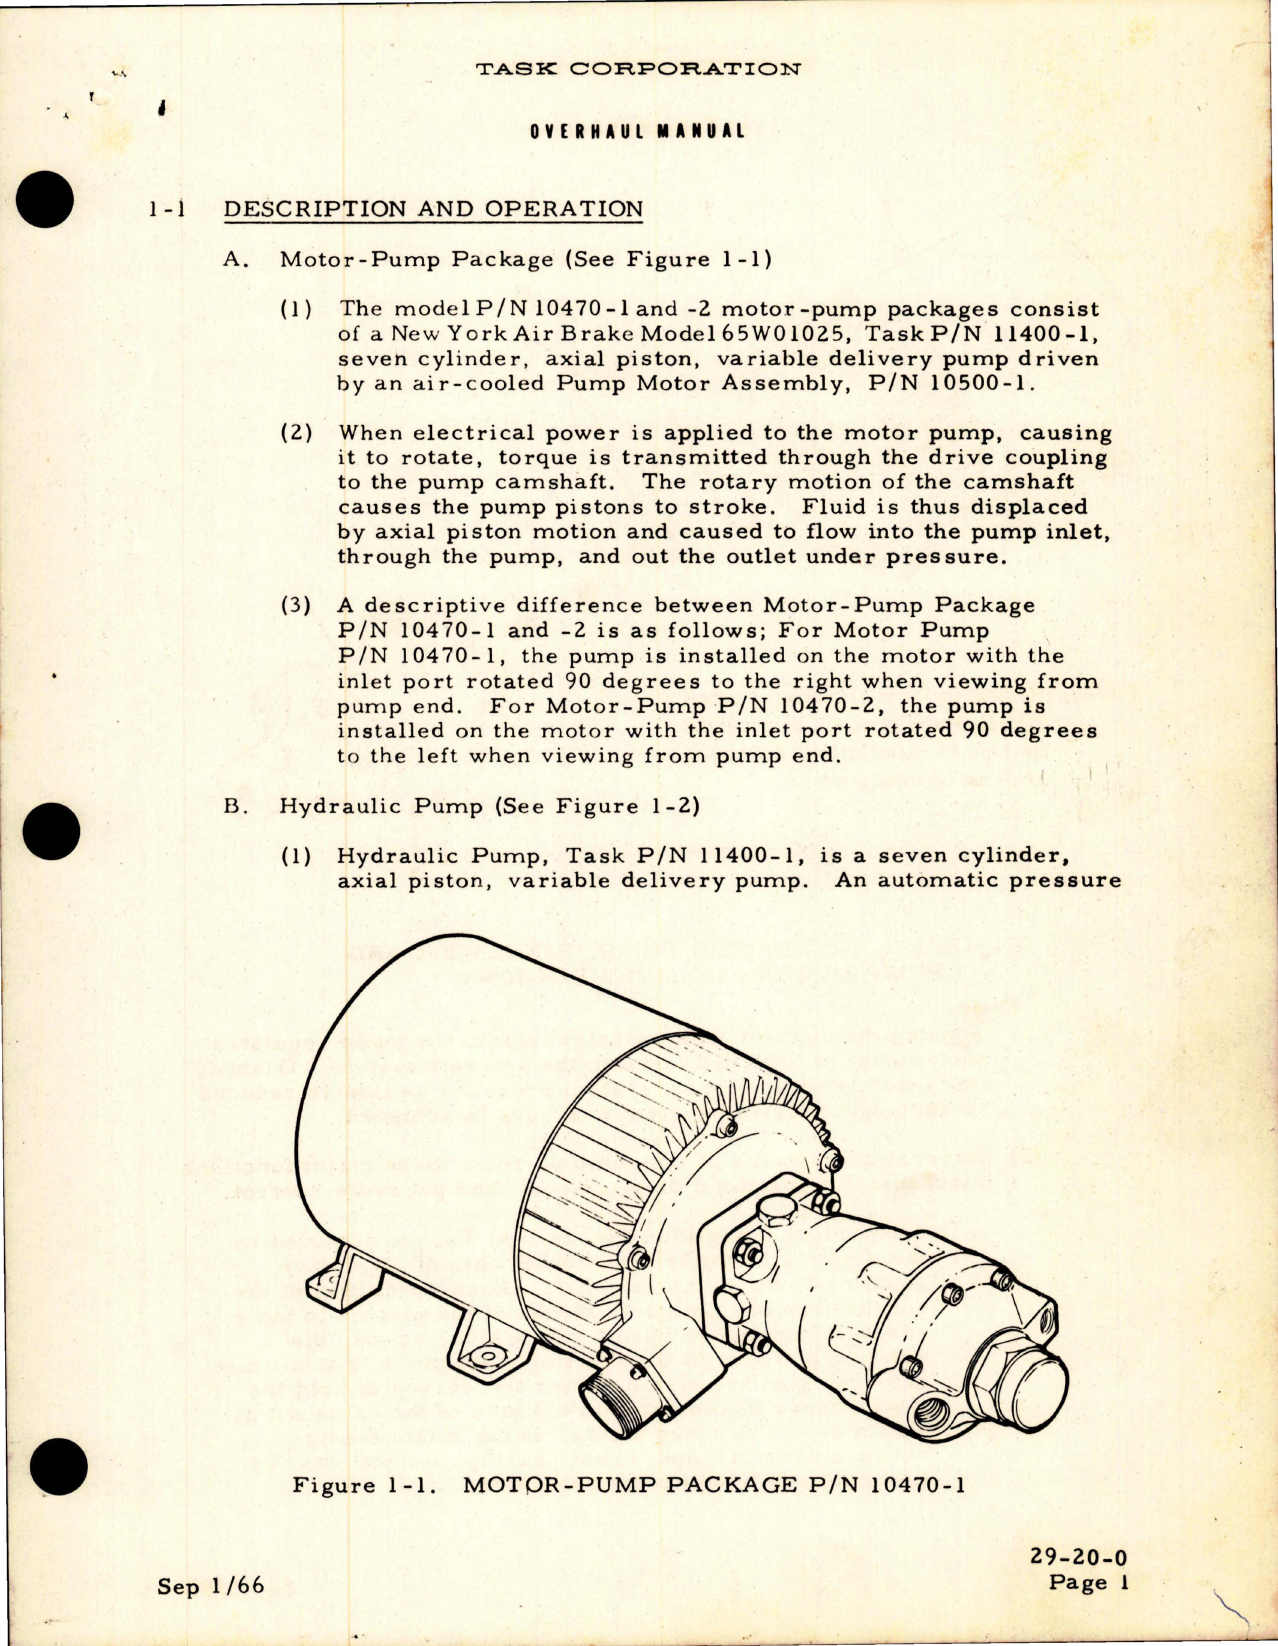 Sample page 5 from AirCorps Library document: Overhaul Manual for Motor Pump Package - Parts 10470-1 and 10470-2 